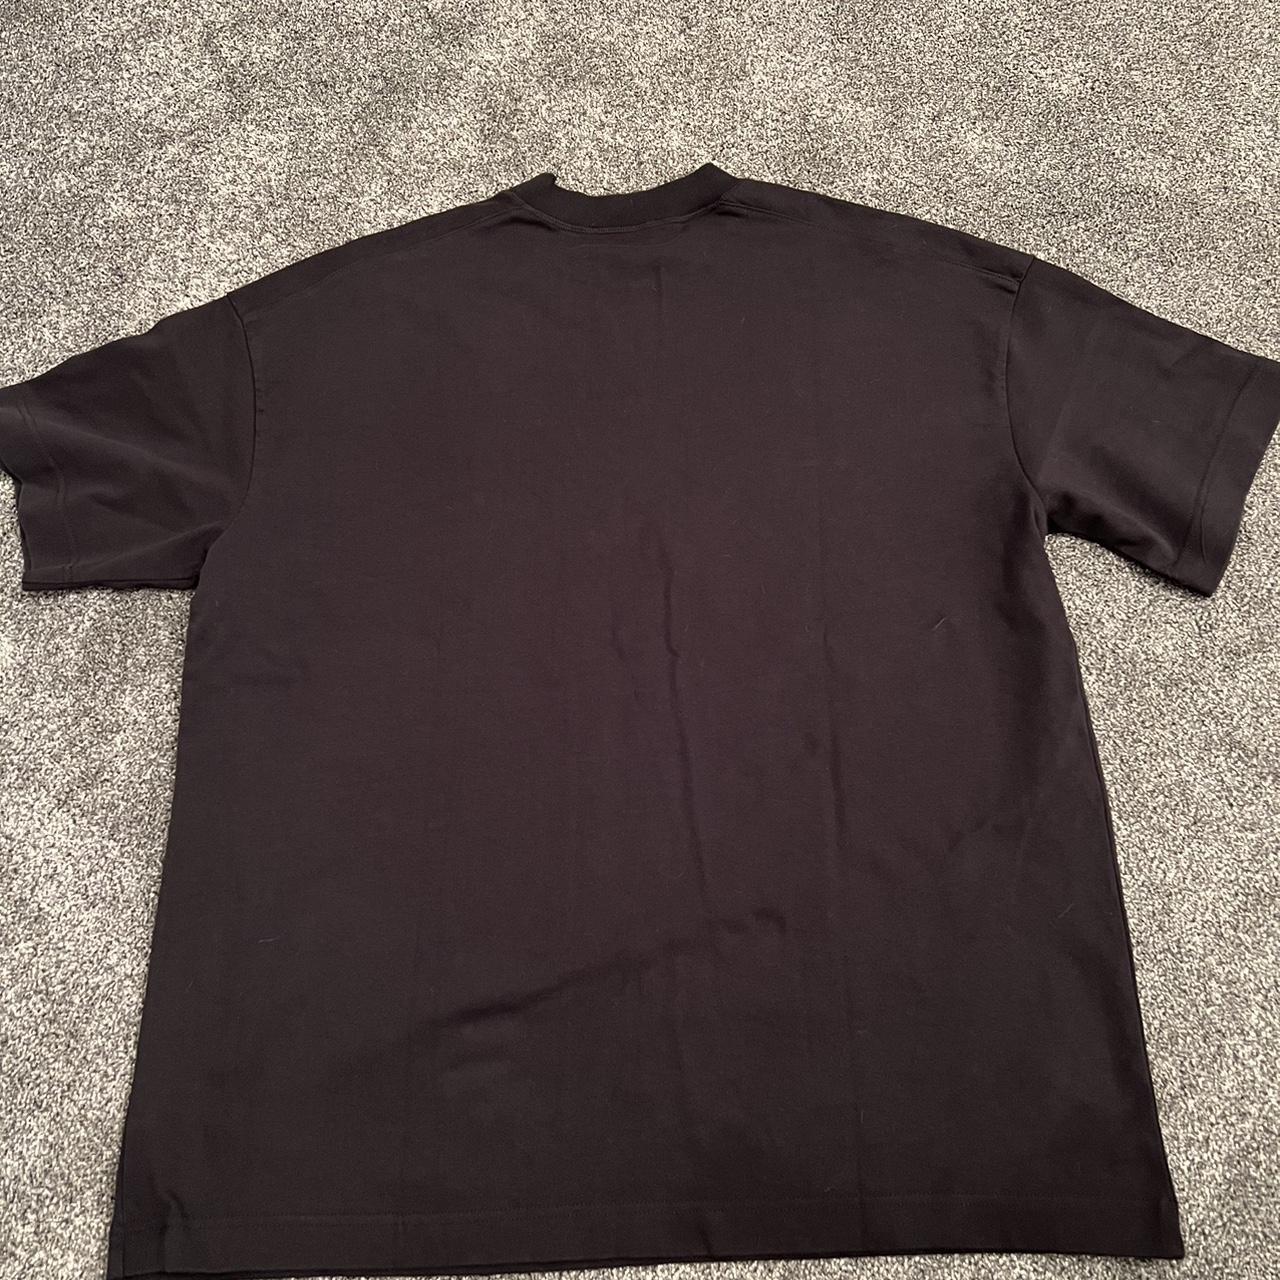 Cole Buxton tee size M - unworn with tags... - Depop